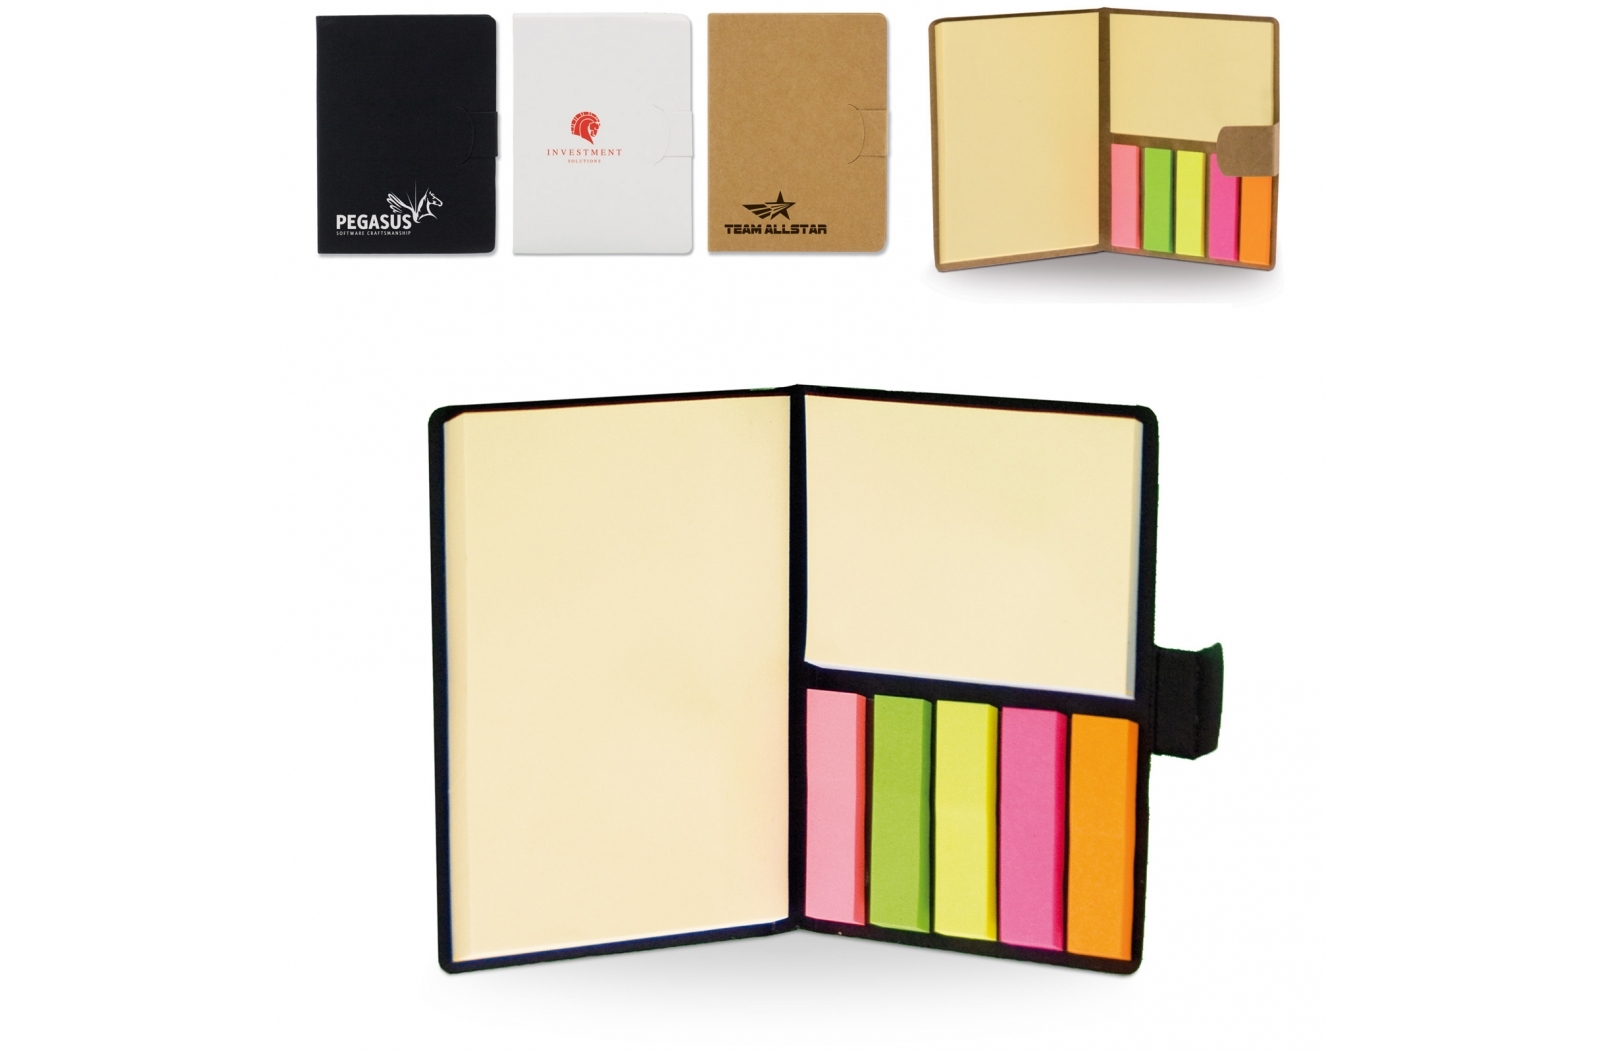 Notebook with Sticky Notes of Various Sizes - Littleton